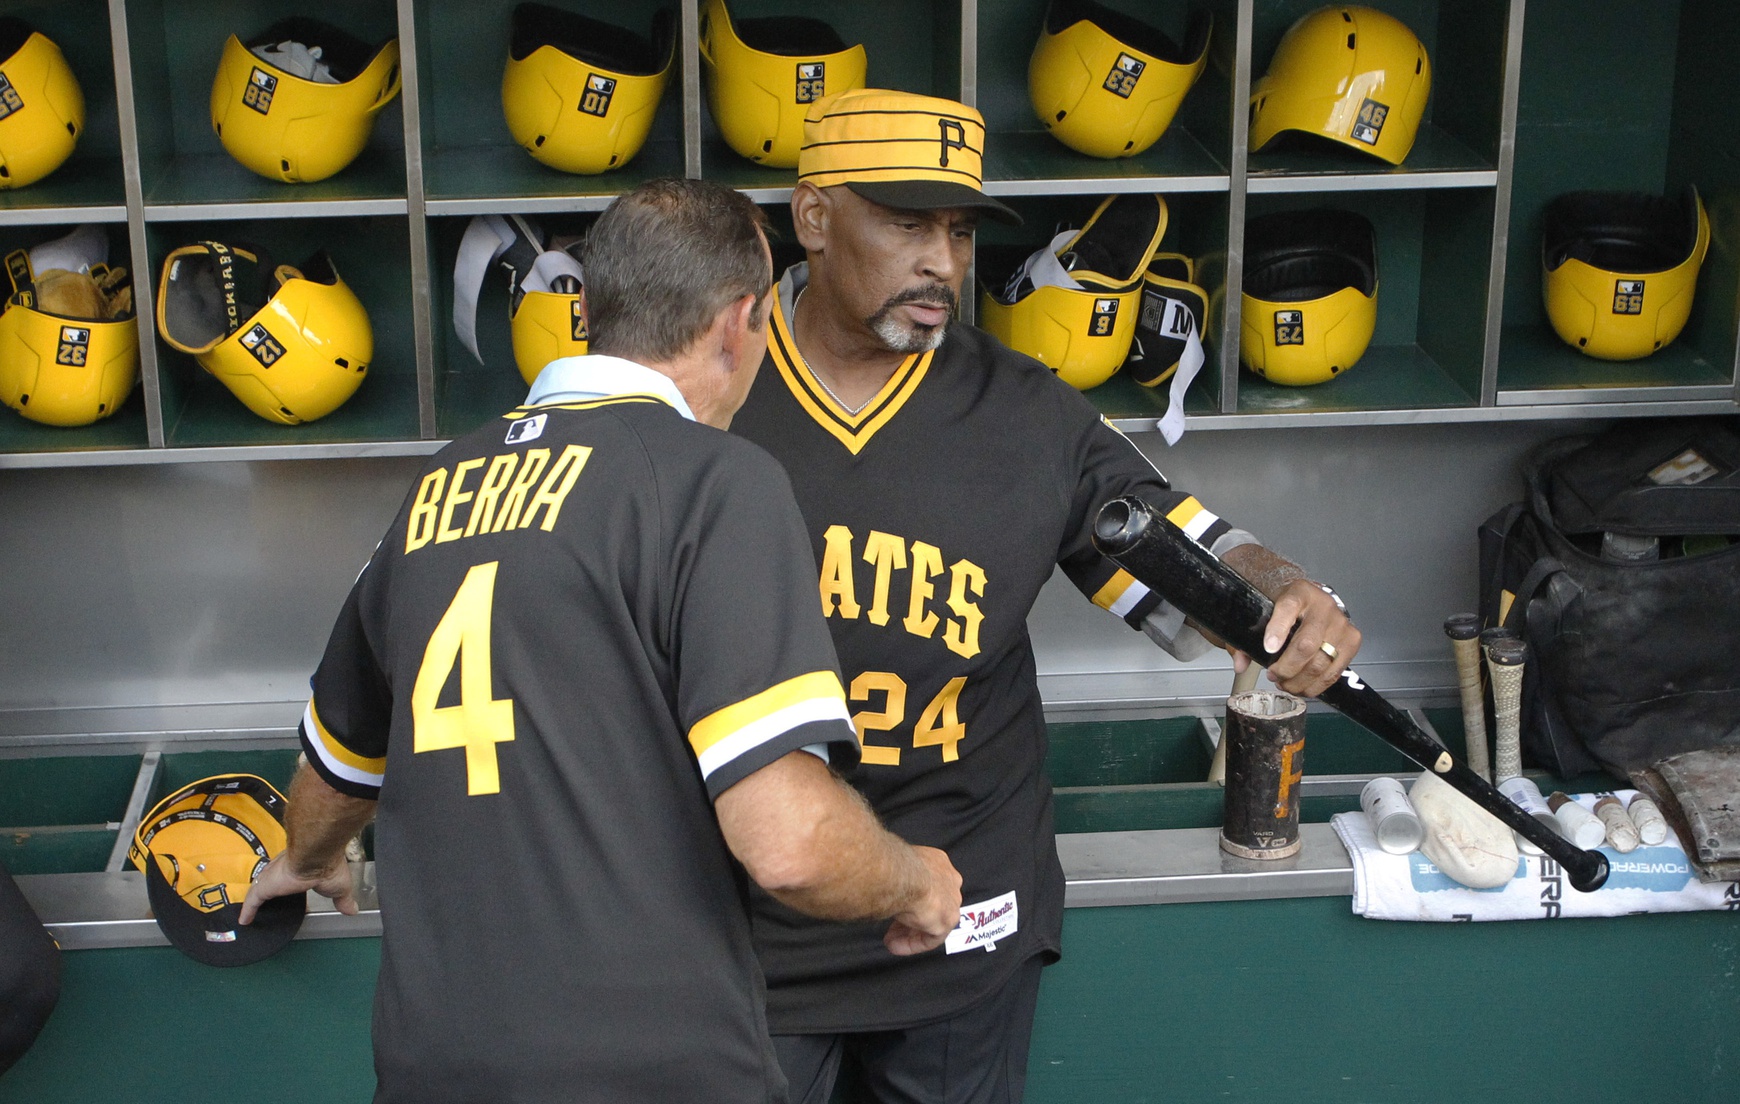 A Former World Series Champion Offered To be the Pirates Batting Coach. They Said No.